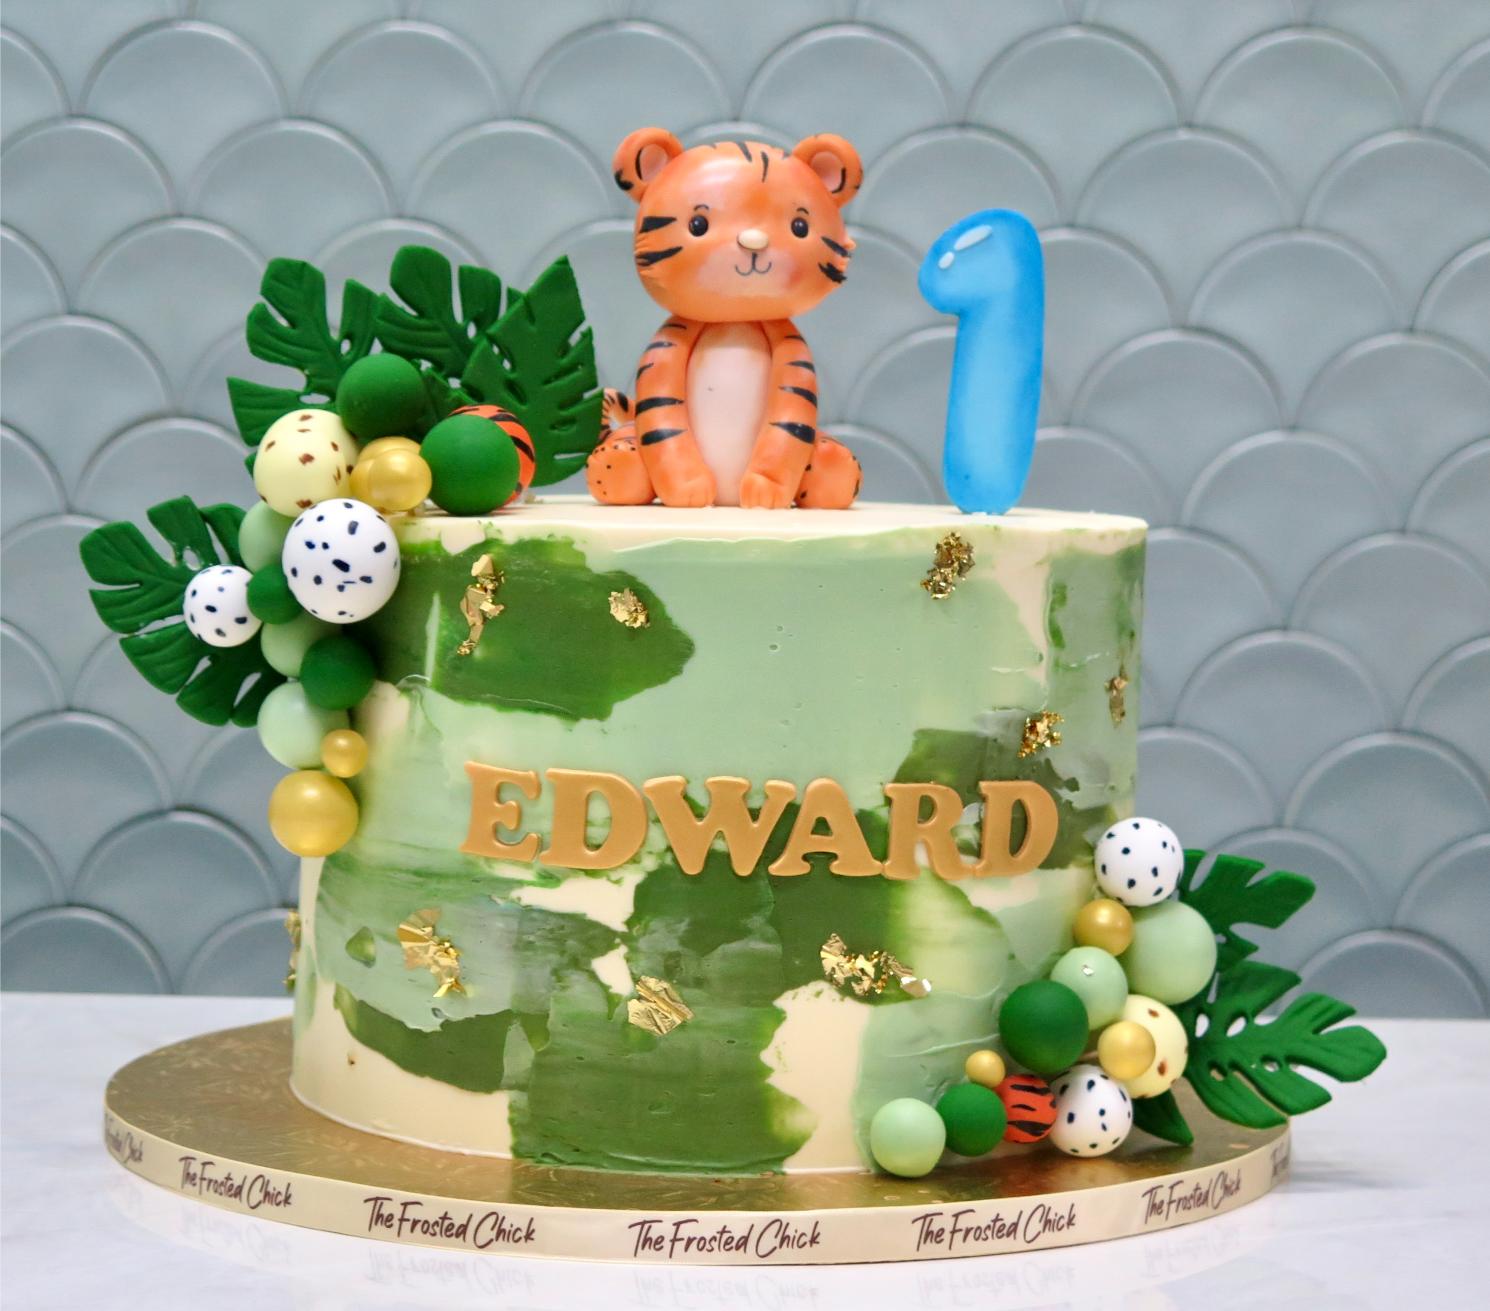 Pin by Kel O'donnell on cakes | Tiger cake, Birthday cake kids, Cake  designs birthday